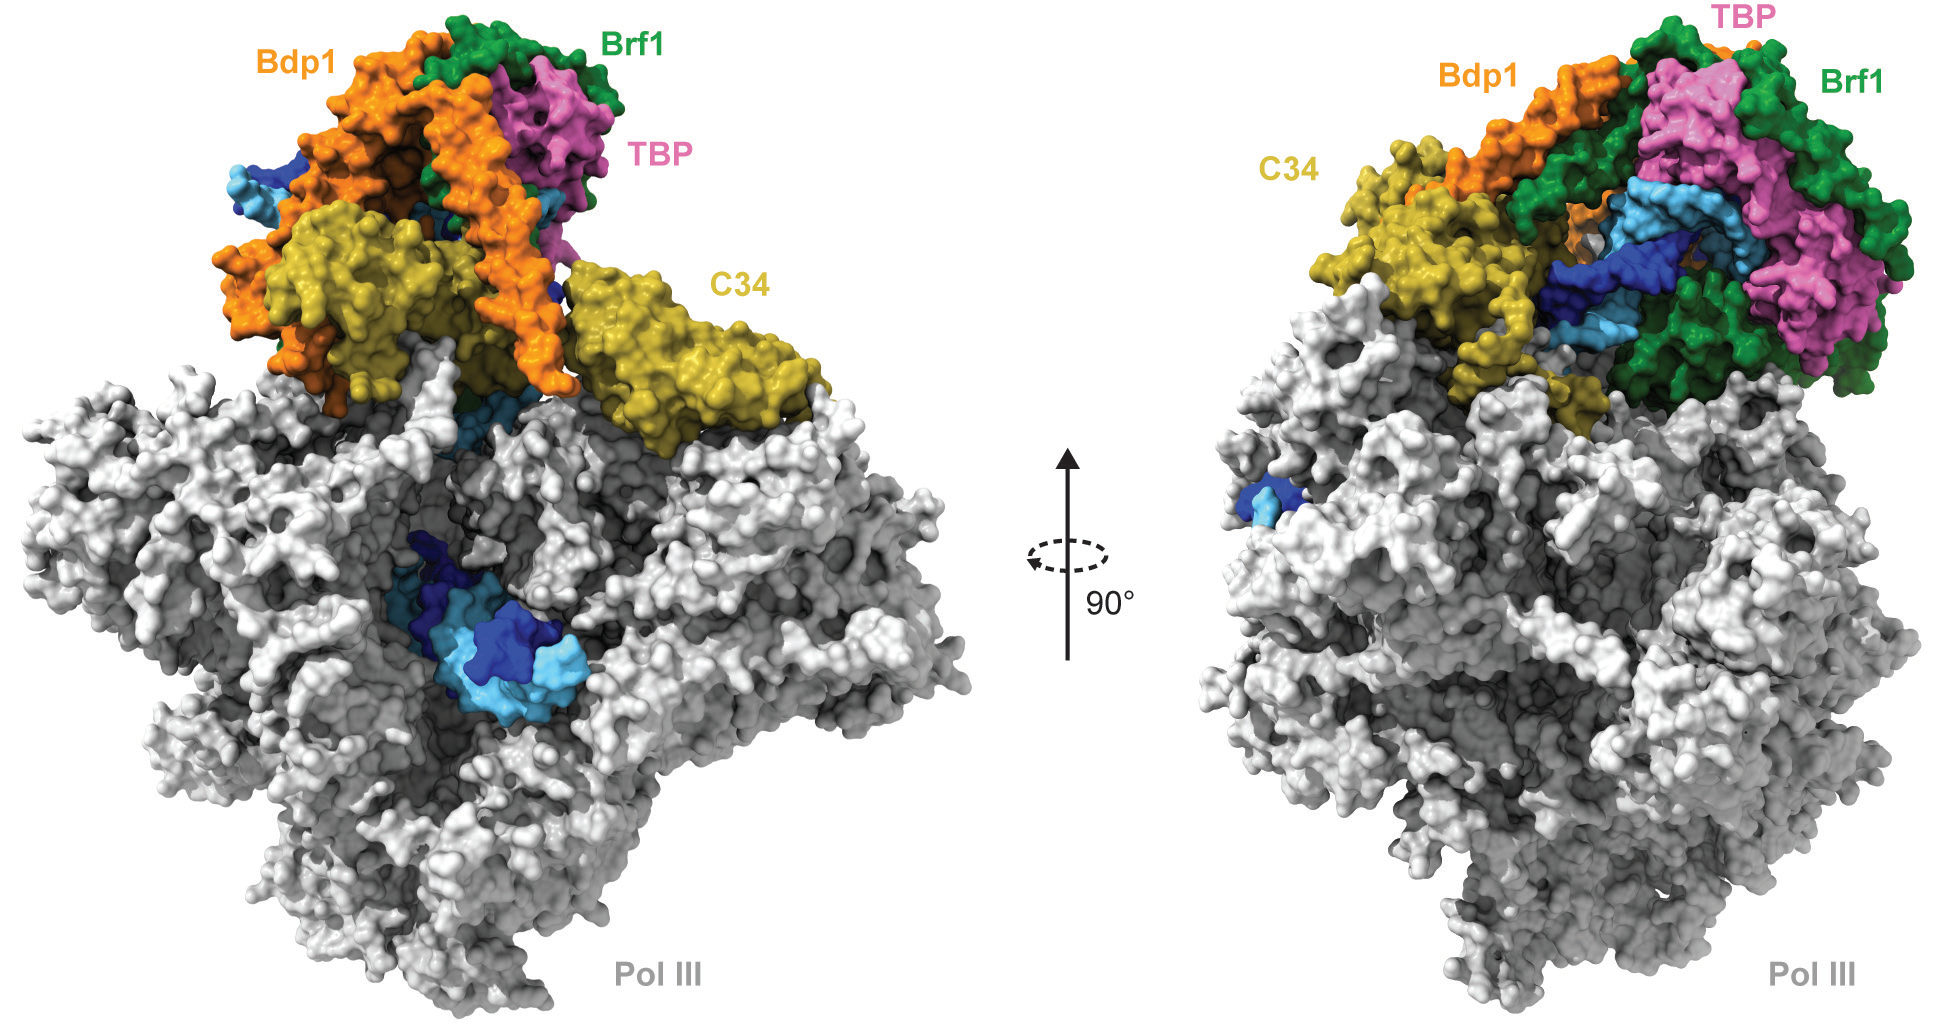 Figure 1: Two orthogonal views of the core Pol III PIC, represented as a molecular surface. The template and non-template strands of the promoter DNA are coloured in blue and cyan, respectively. The<br/>Pol III enzyme is depicted in grey, with the exception of subunit C34 which is depicted in yellow. TFIIIB components, Brf1, TBP and Bdp1 are depicted in green, pink and orange, respectively.